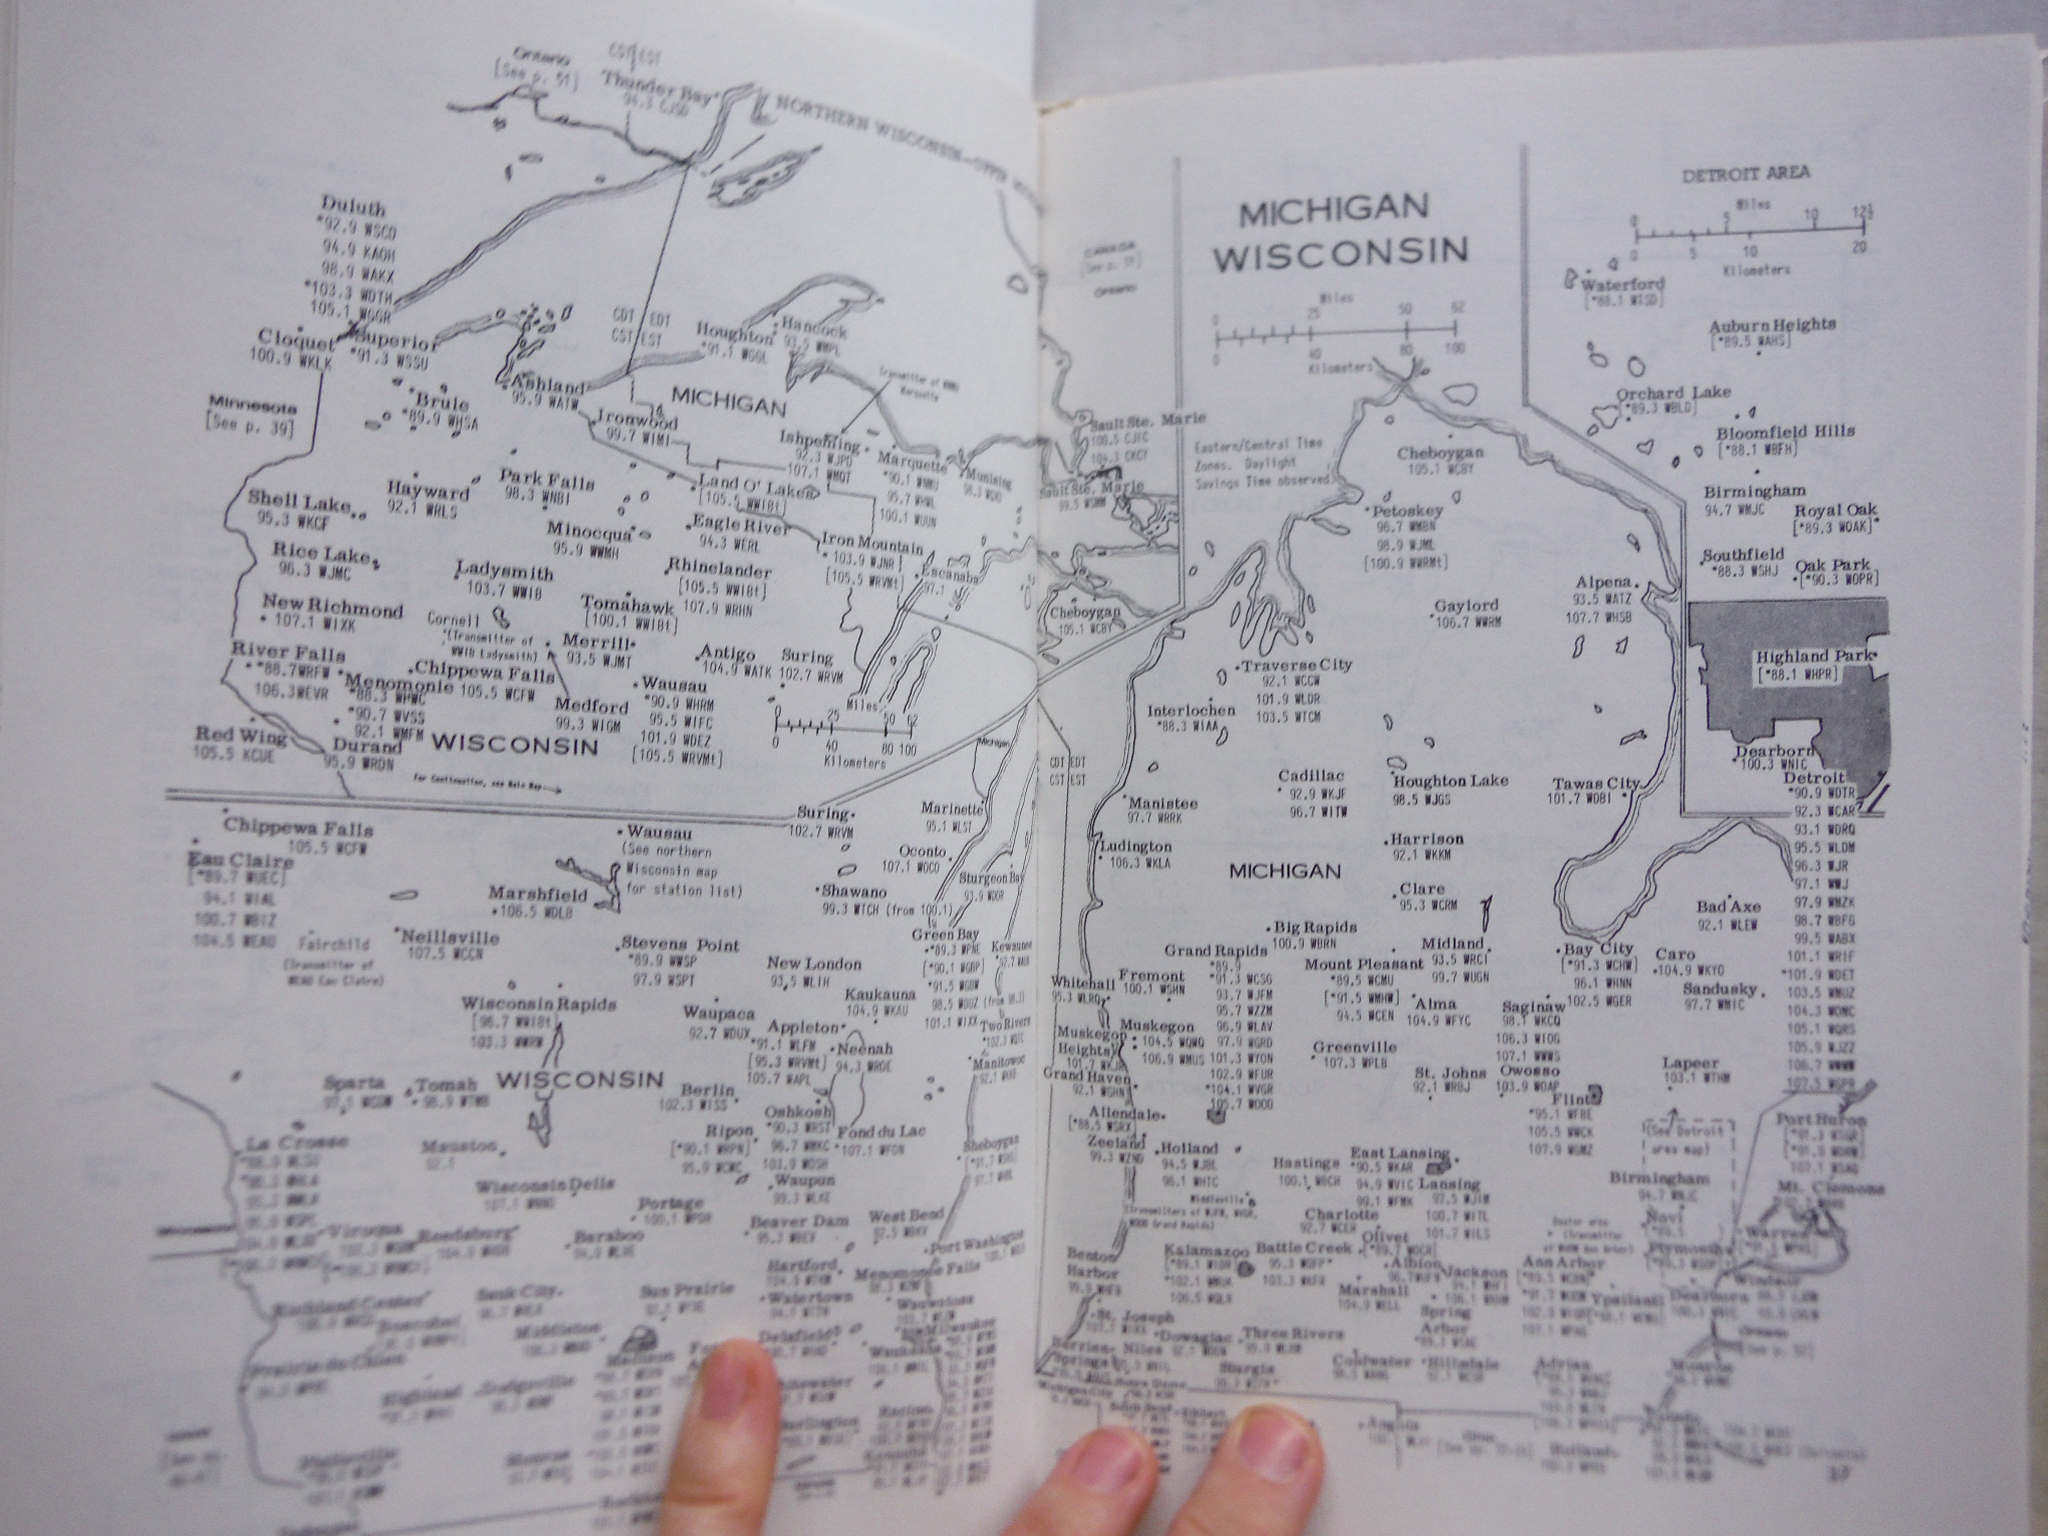 Image 3 of FM atlas and station directory